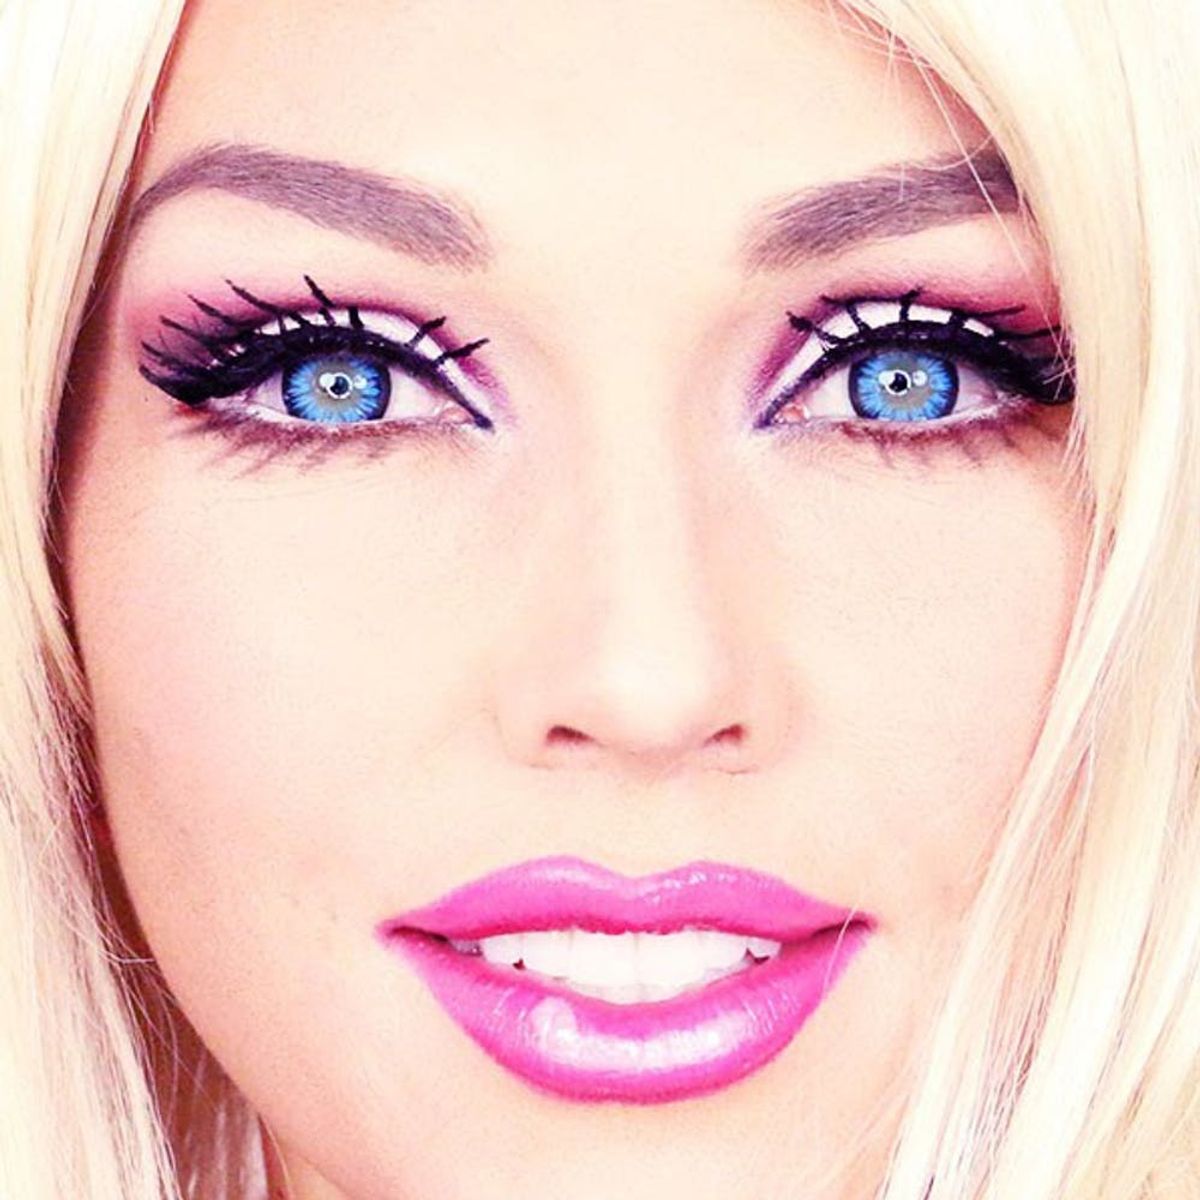 See This Makeup Artist Transform Herself Into a Living Barbie in 90 Seconds